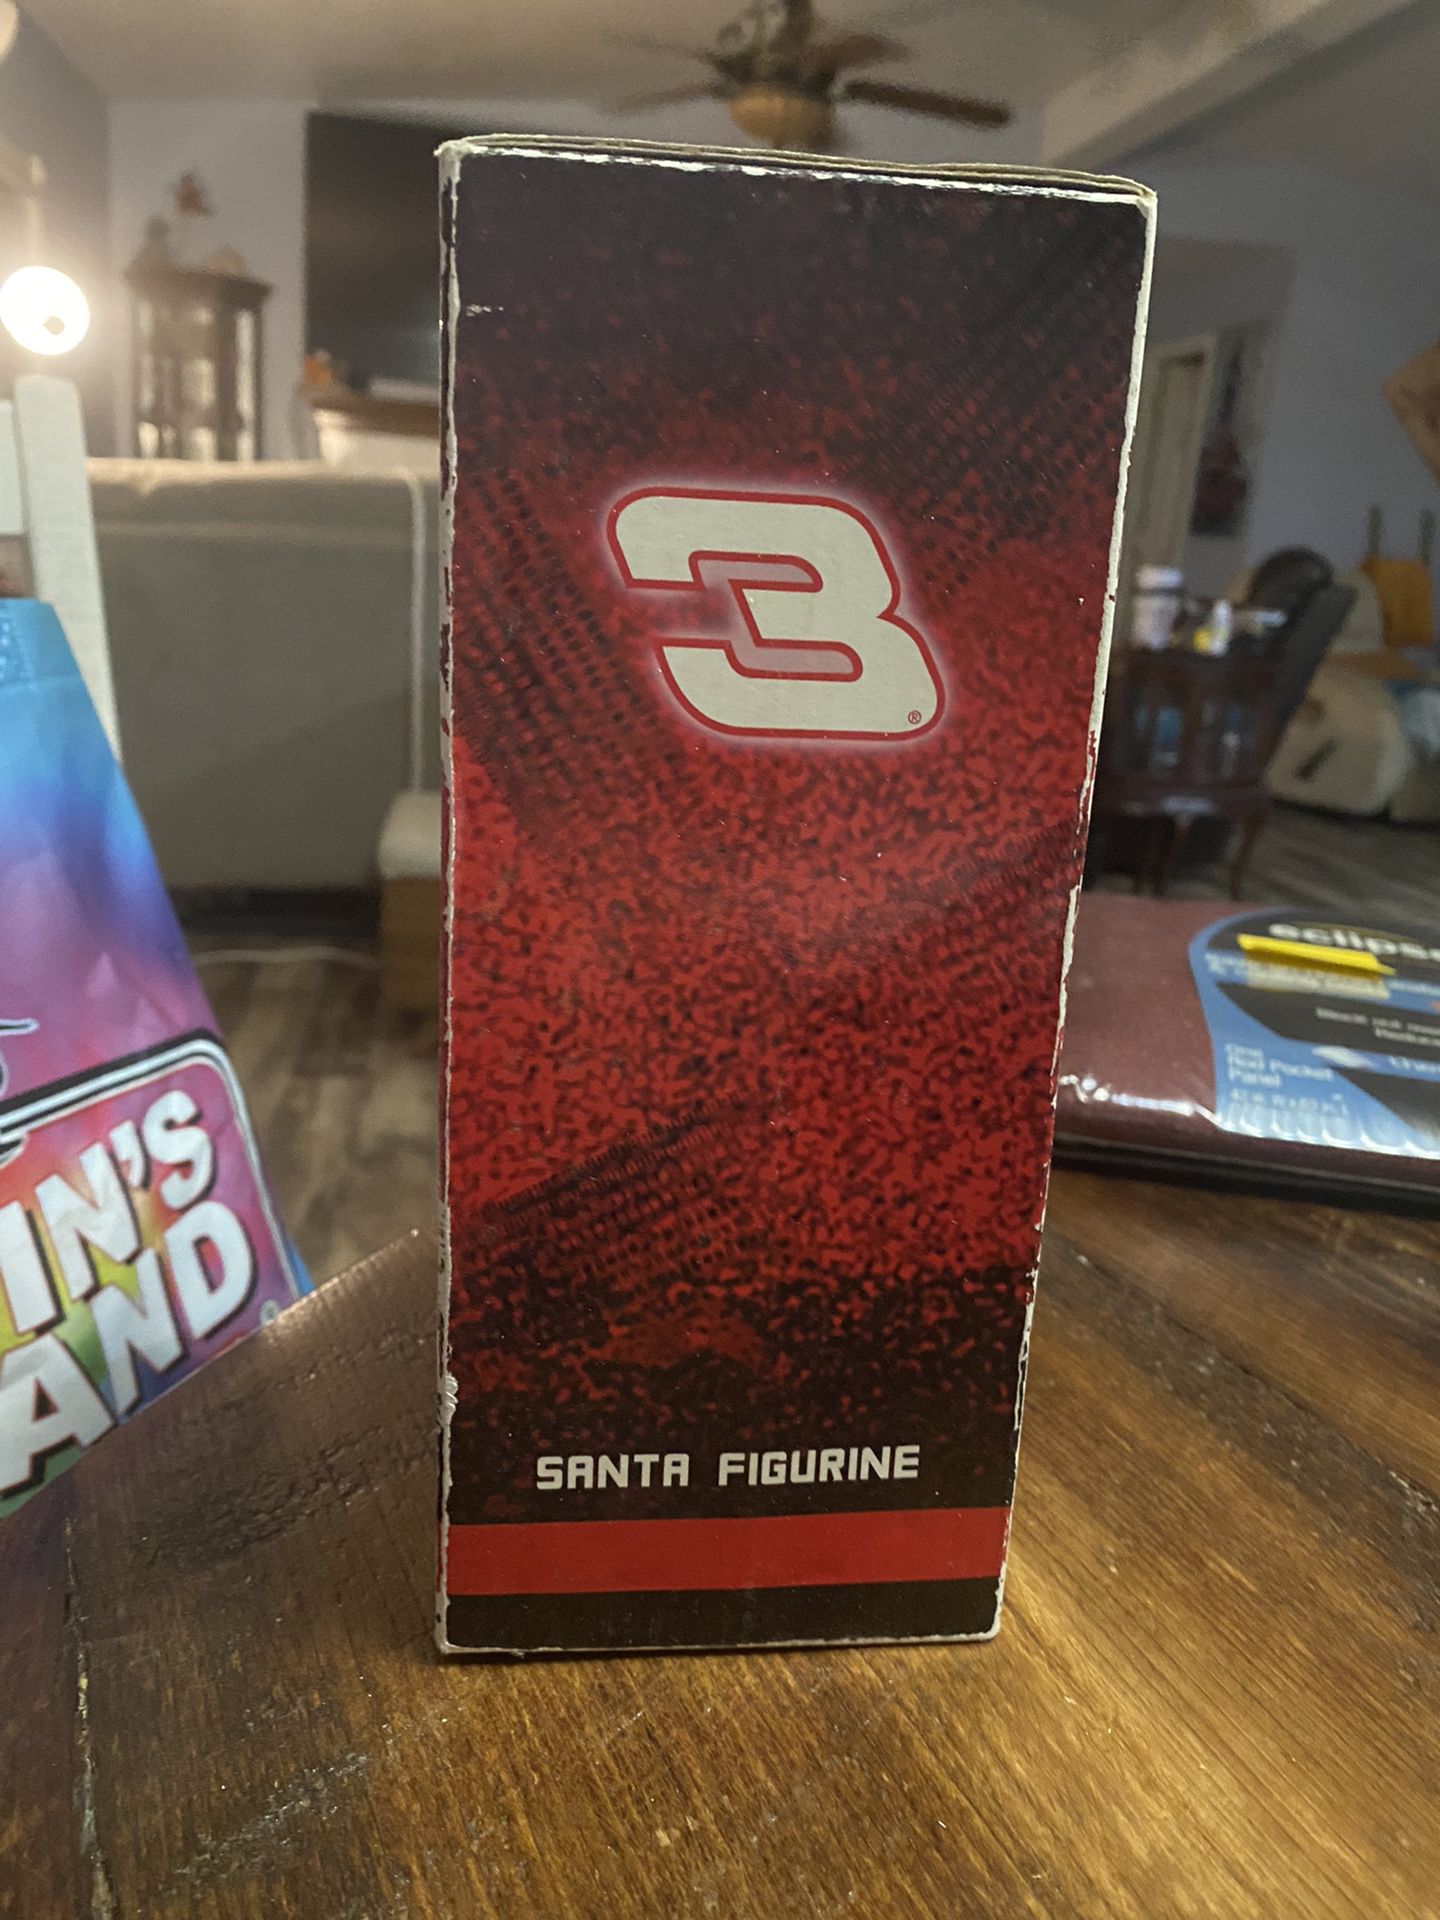  Santa Figurine Dale Earnhardt #3 Nascar Fan Trevco Racing Christmas Original Box.   Original Package. Condition is New. This is actual product photo.